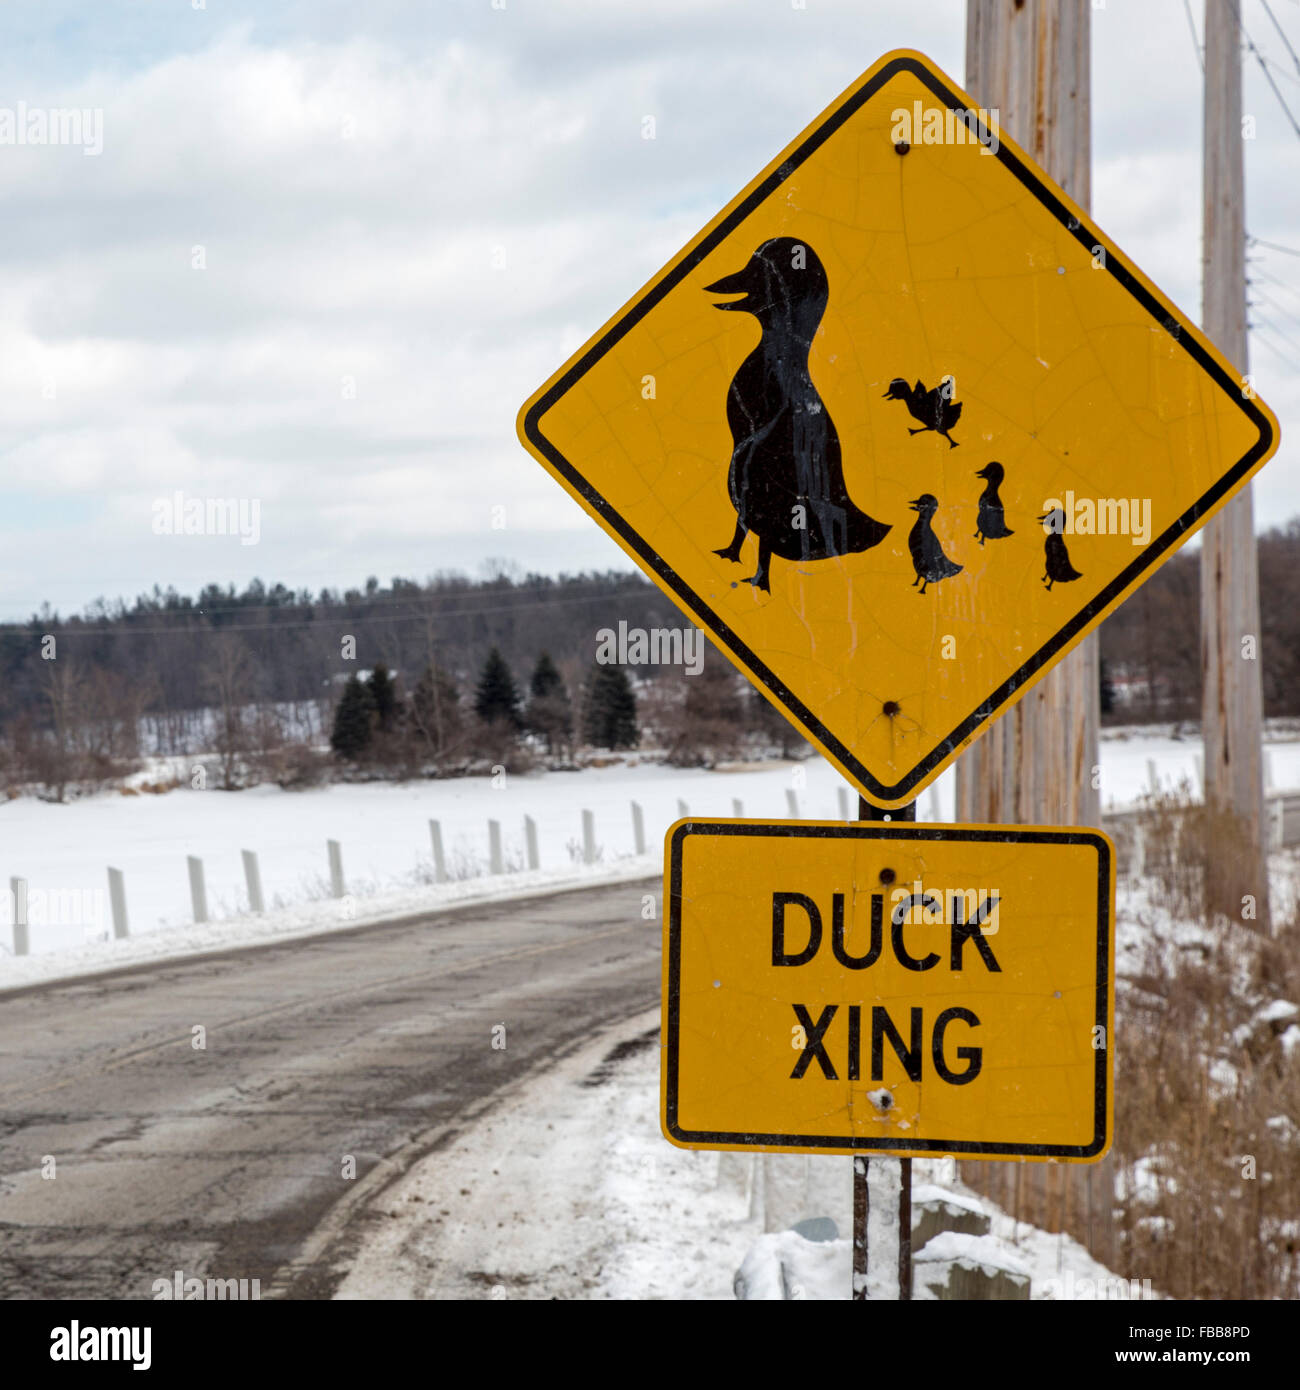 Columbiaville, Michigan - A sign warns of ducks crossing the road. Stock Photo